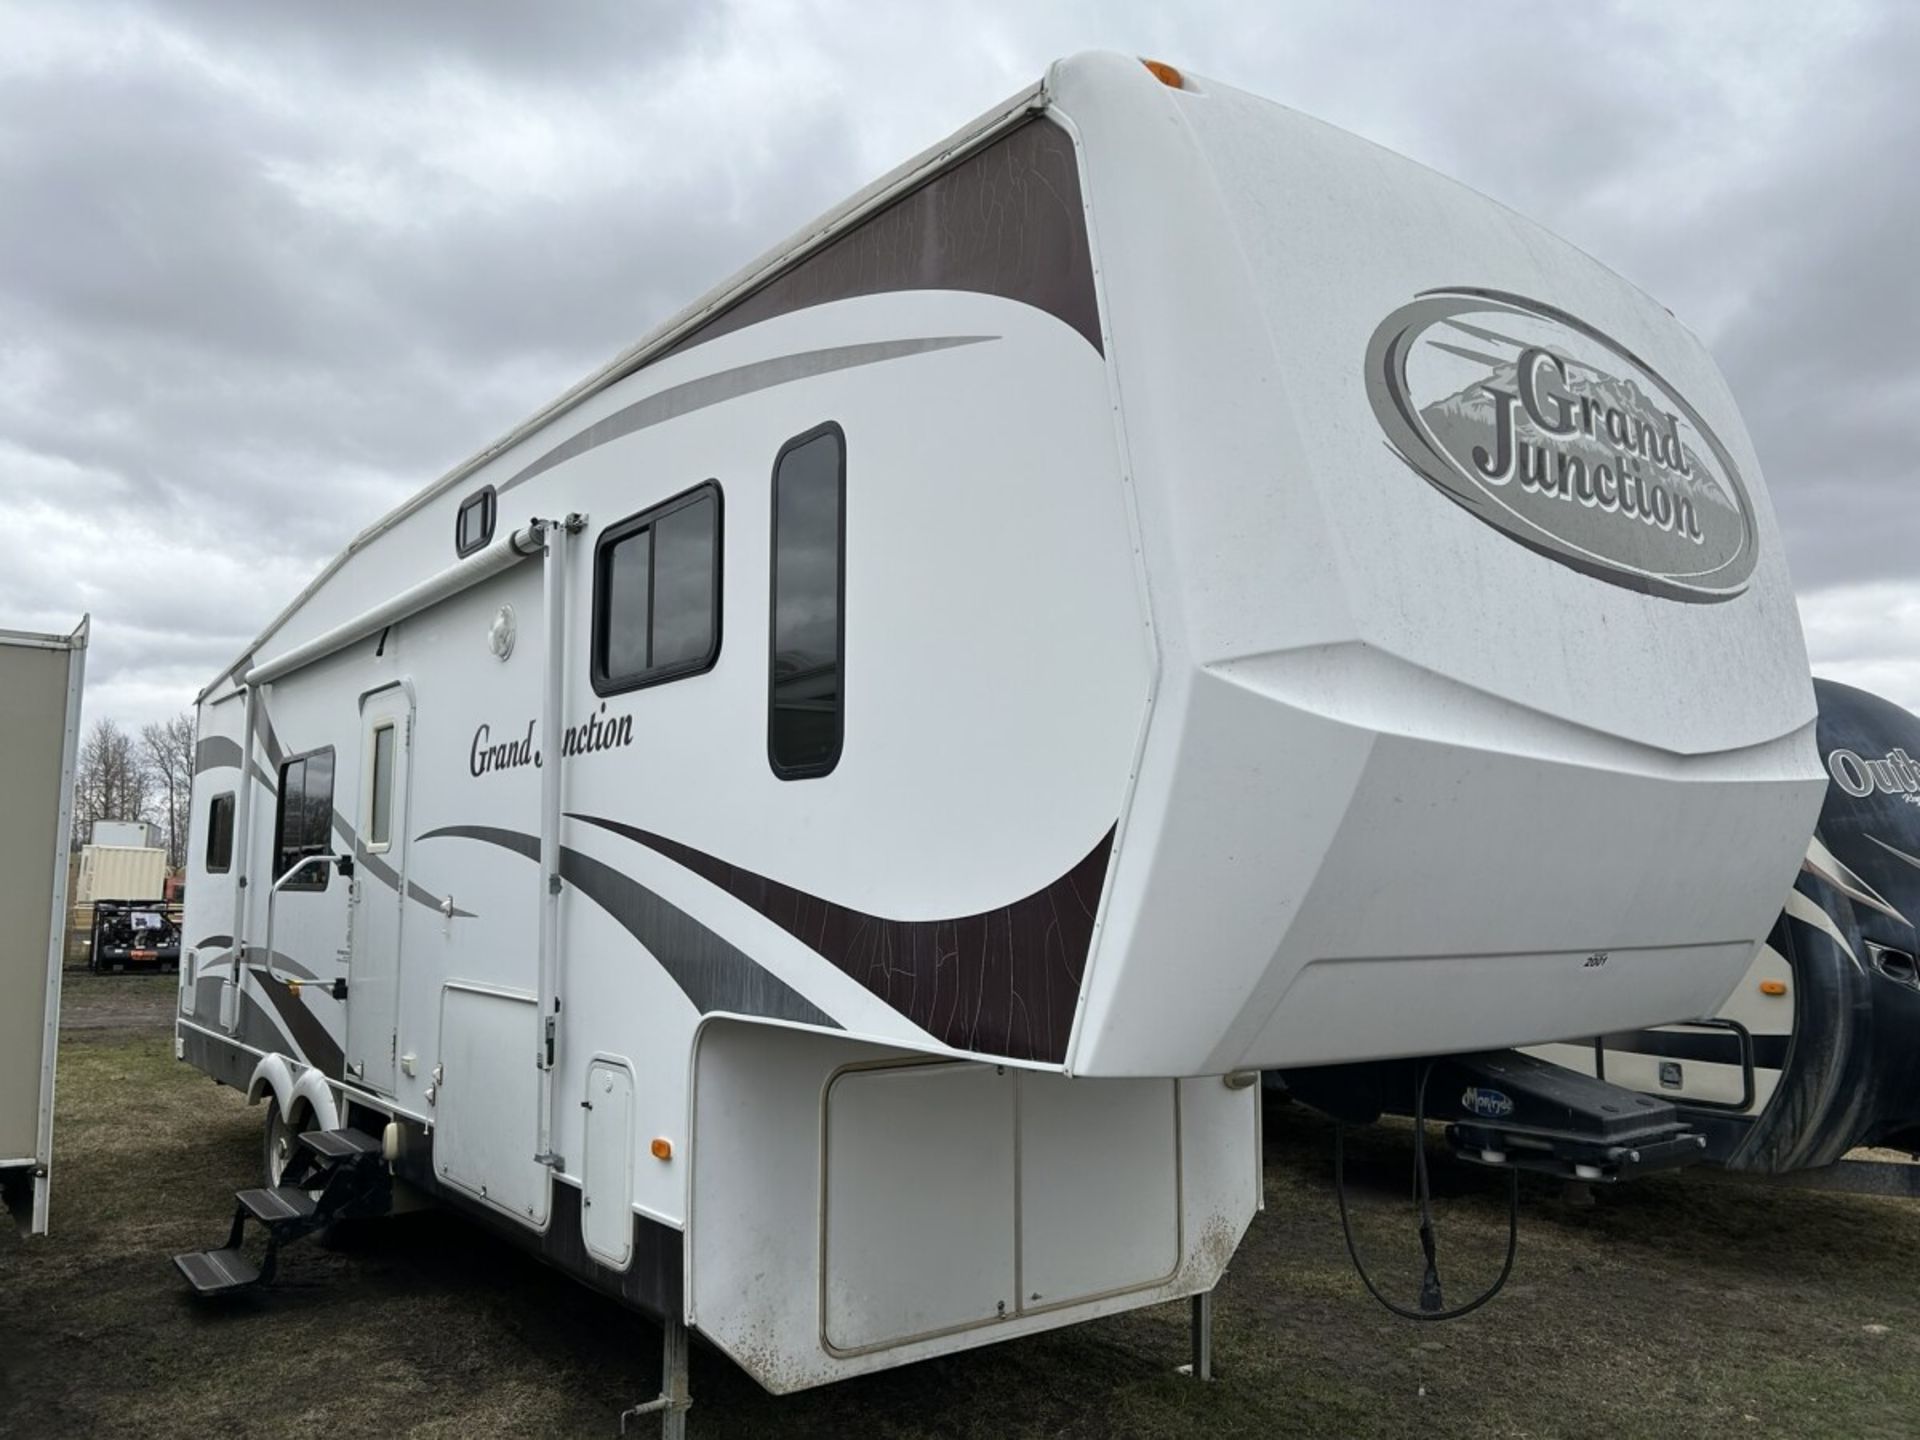 2007 GRAND JUNCTION 29DRK BY DUTCHMEN - DOUBLE SLIDE, AWNING, AC, REAR KITCHEN, FRONT QUEEN